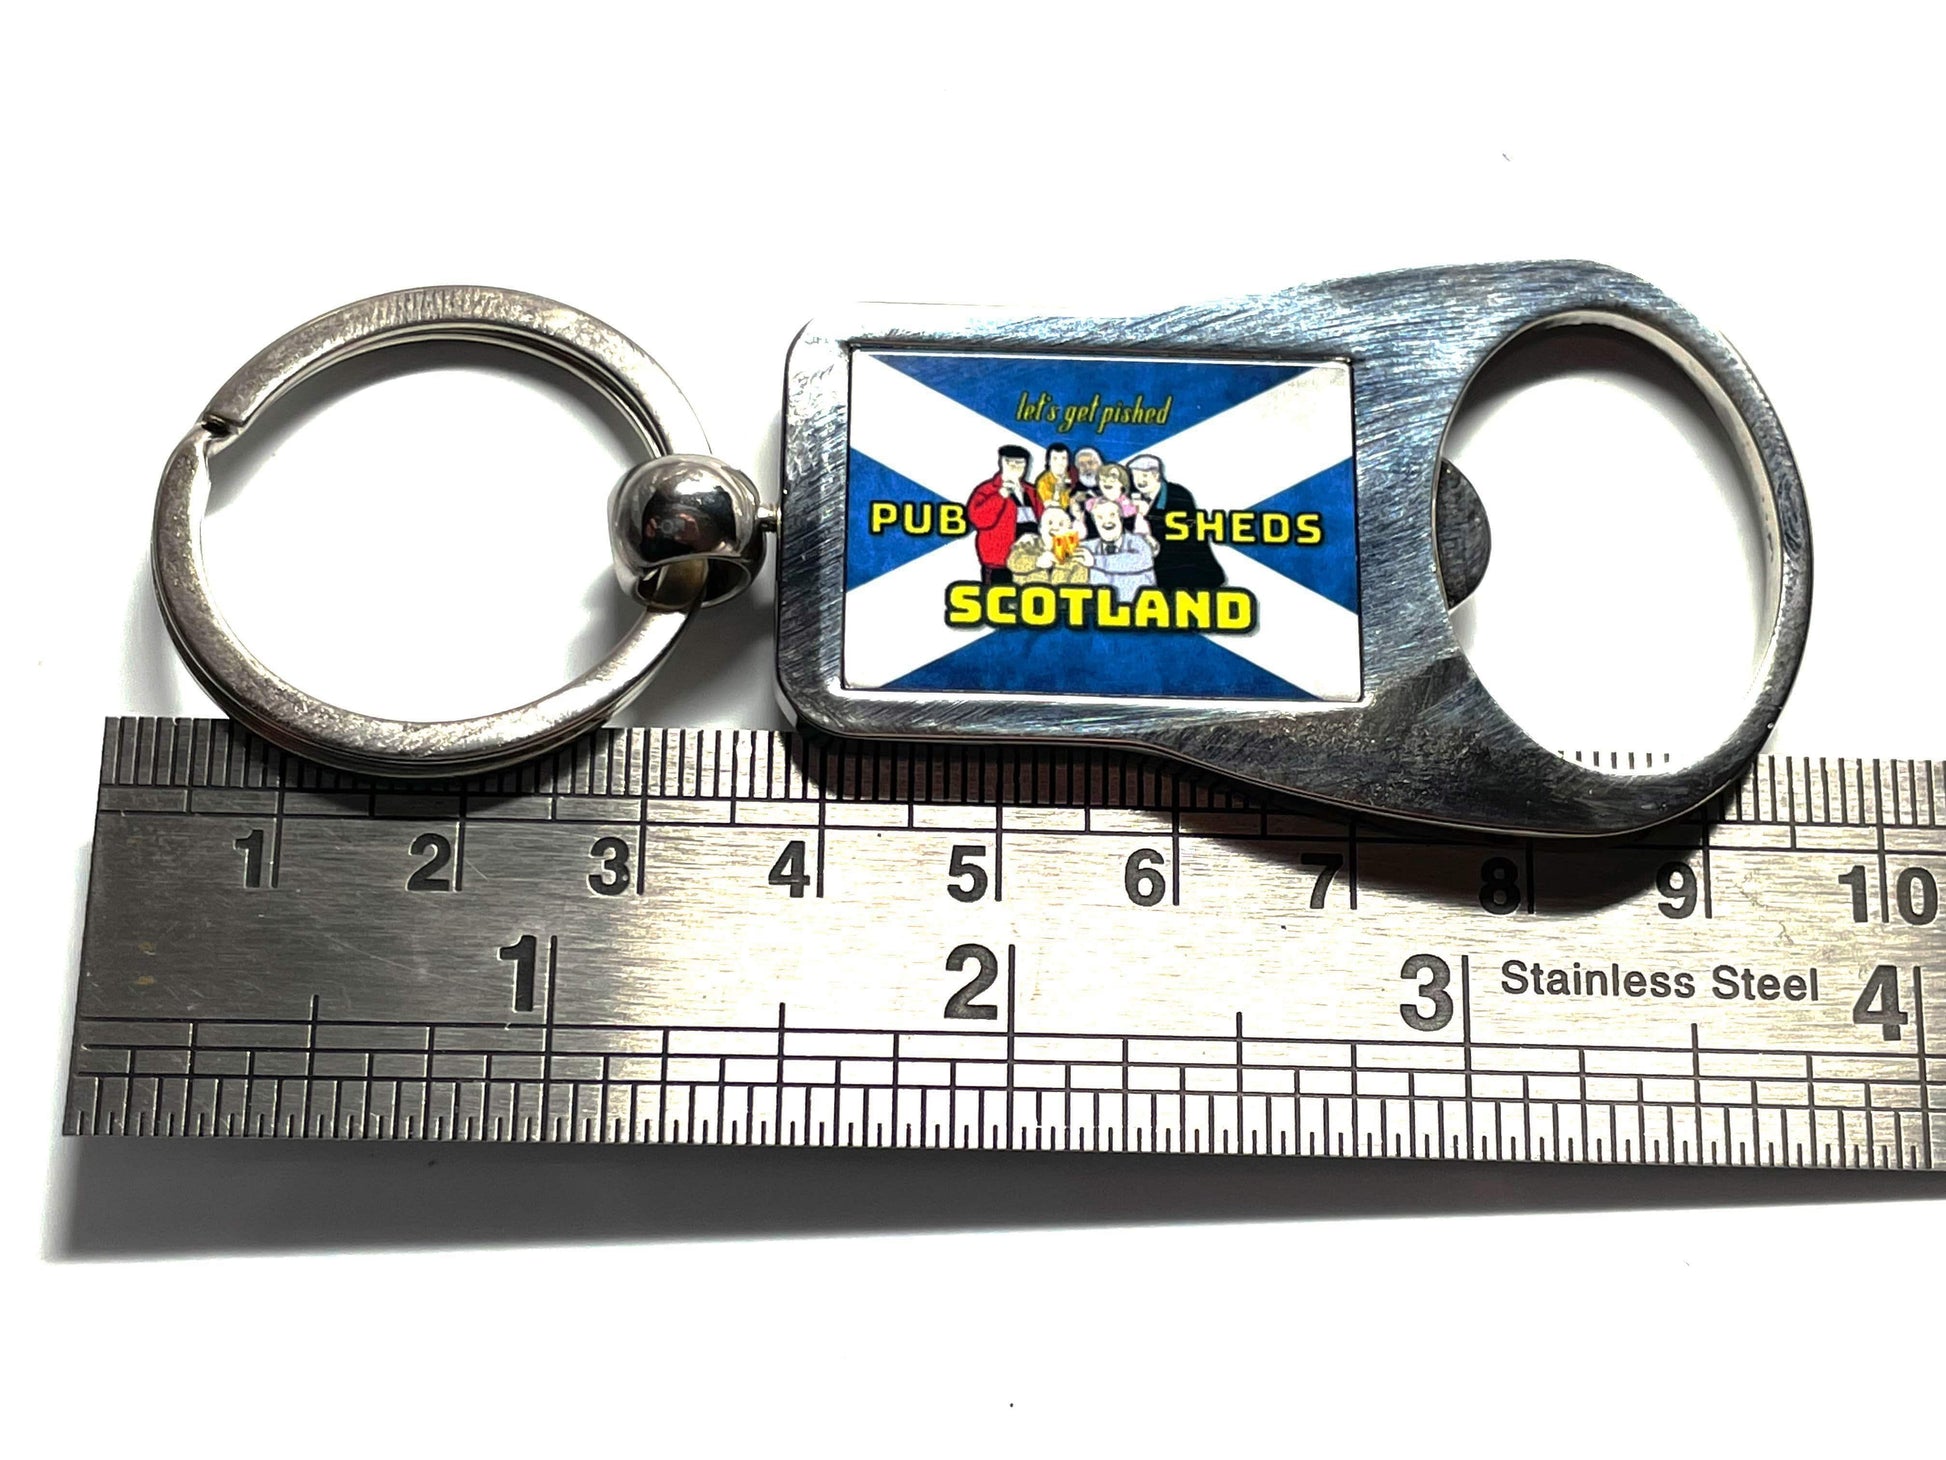 Pub Shed Scotland Key Ring and Bottle Opener Raise the Bar Print and Design - Raise the Bar